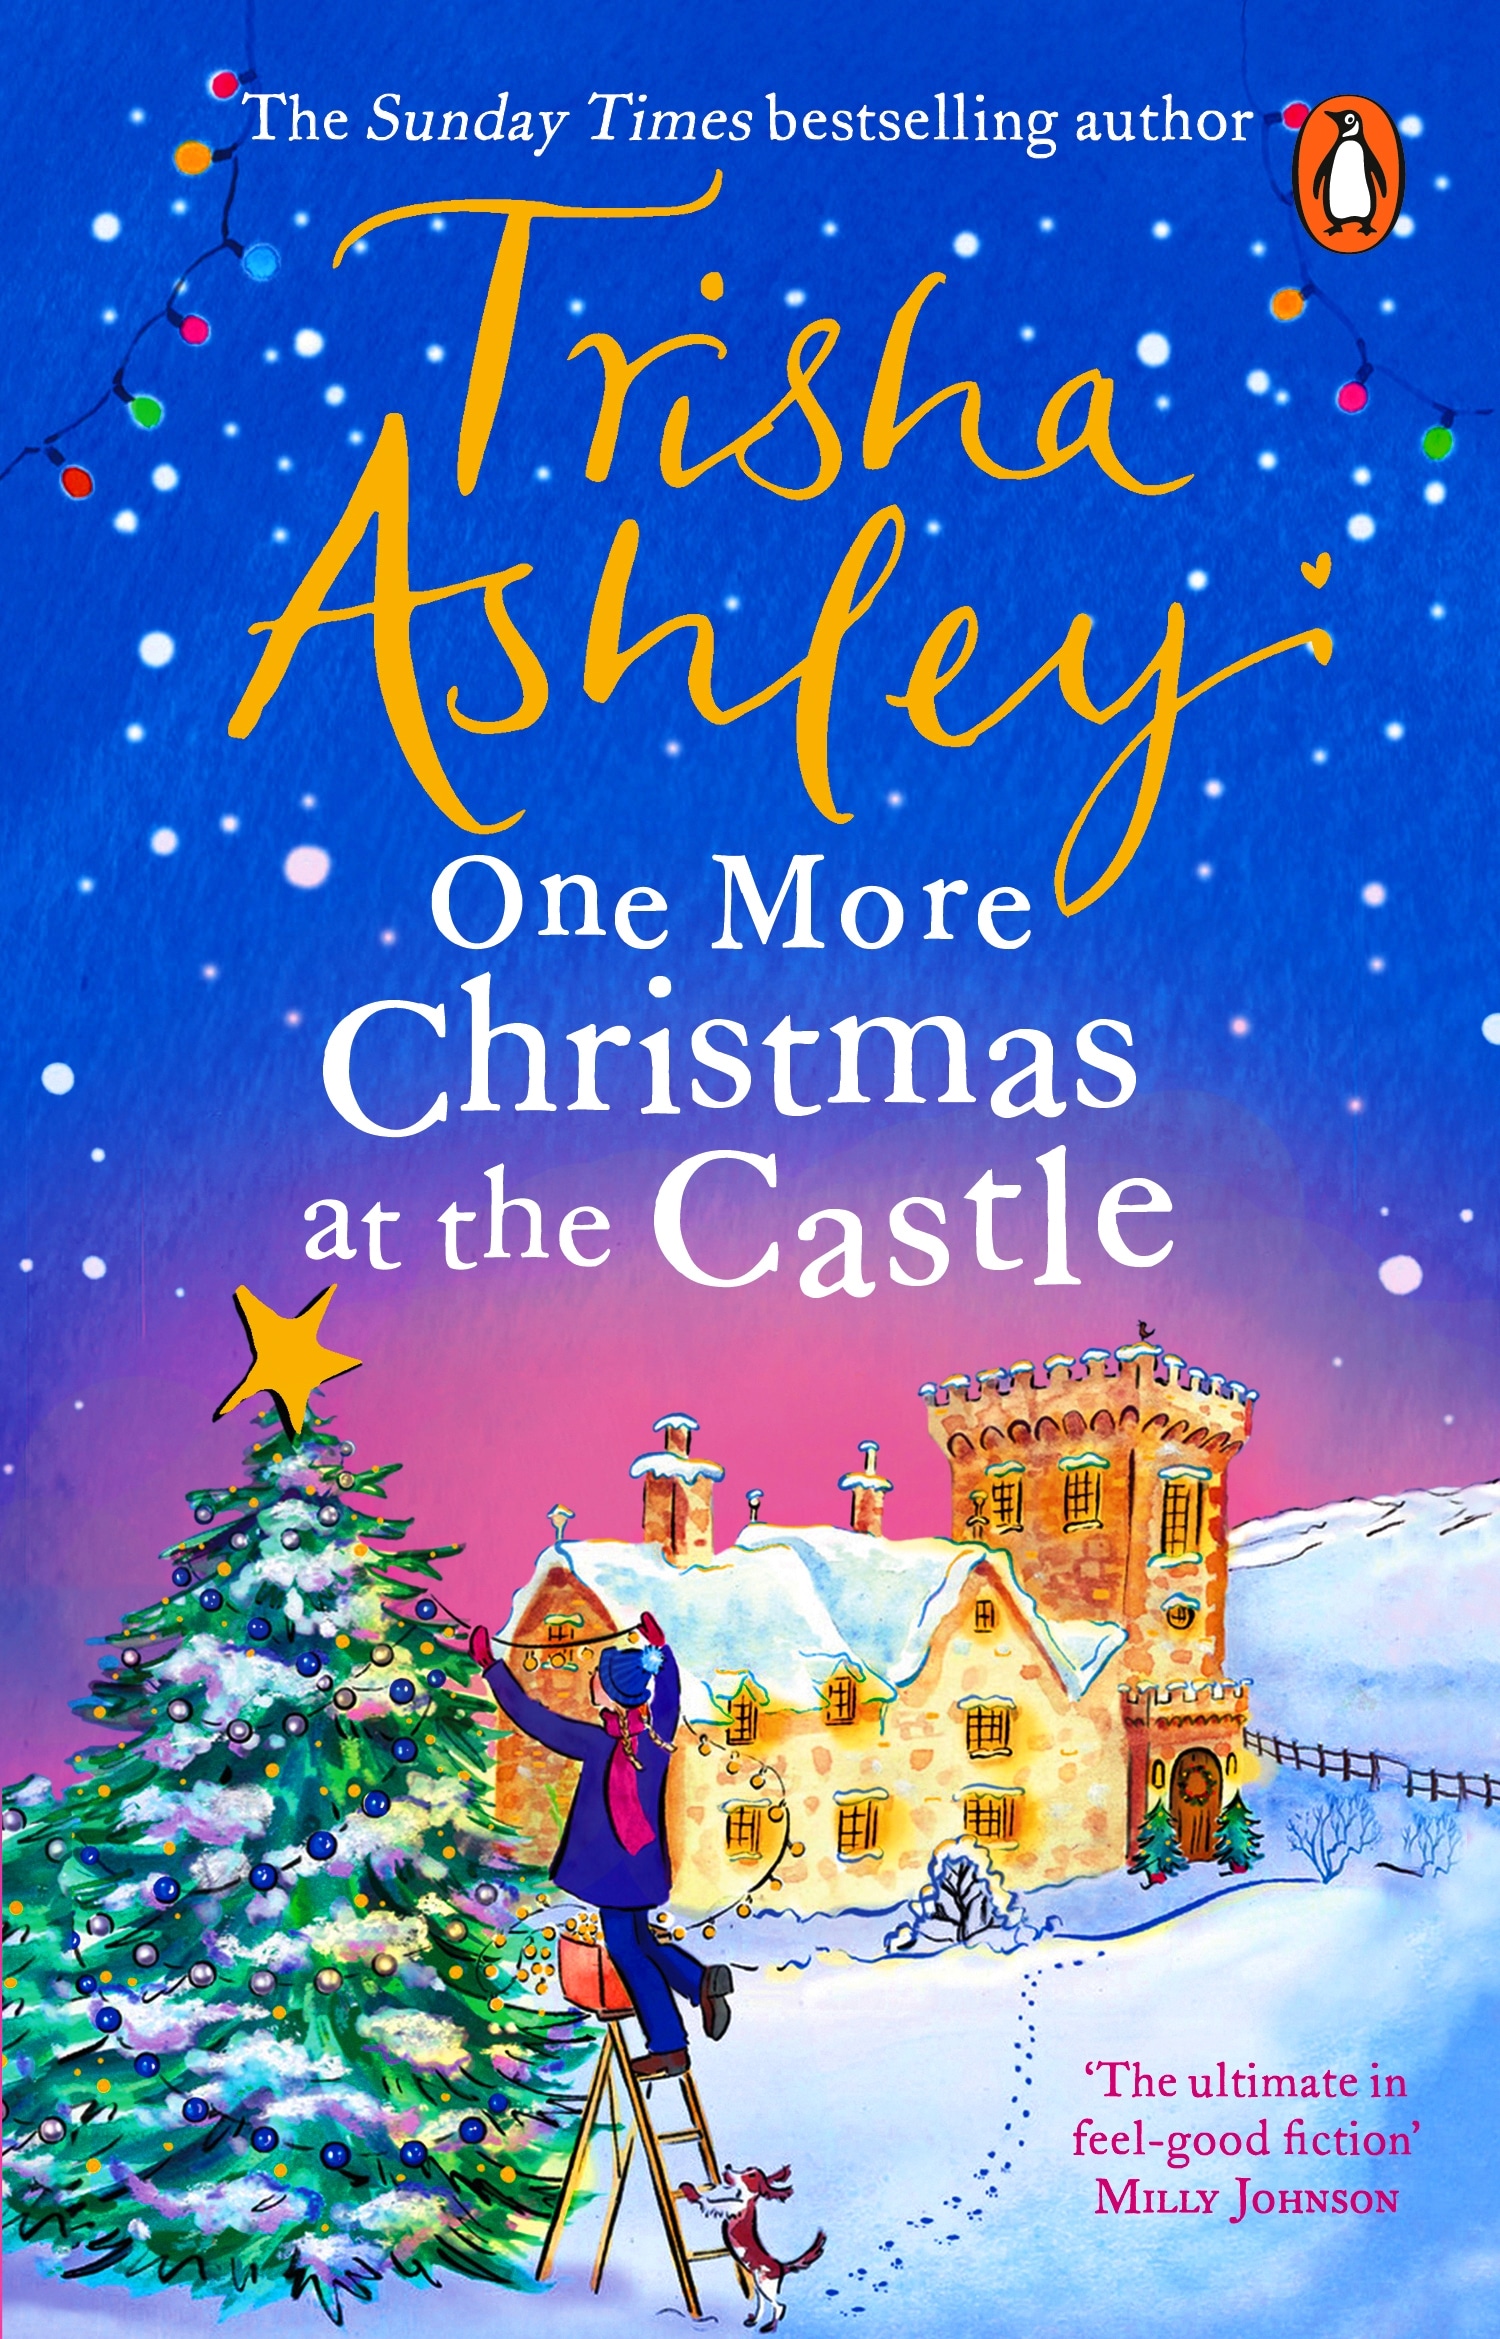 Book “One More Christmas at the Castle” by Trisha Ashley — October 27, 2022